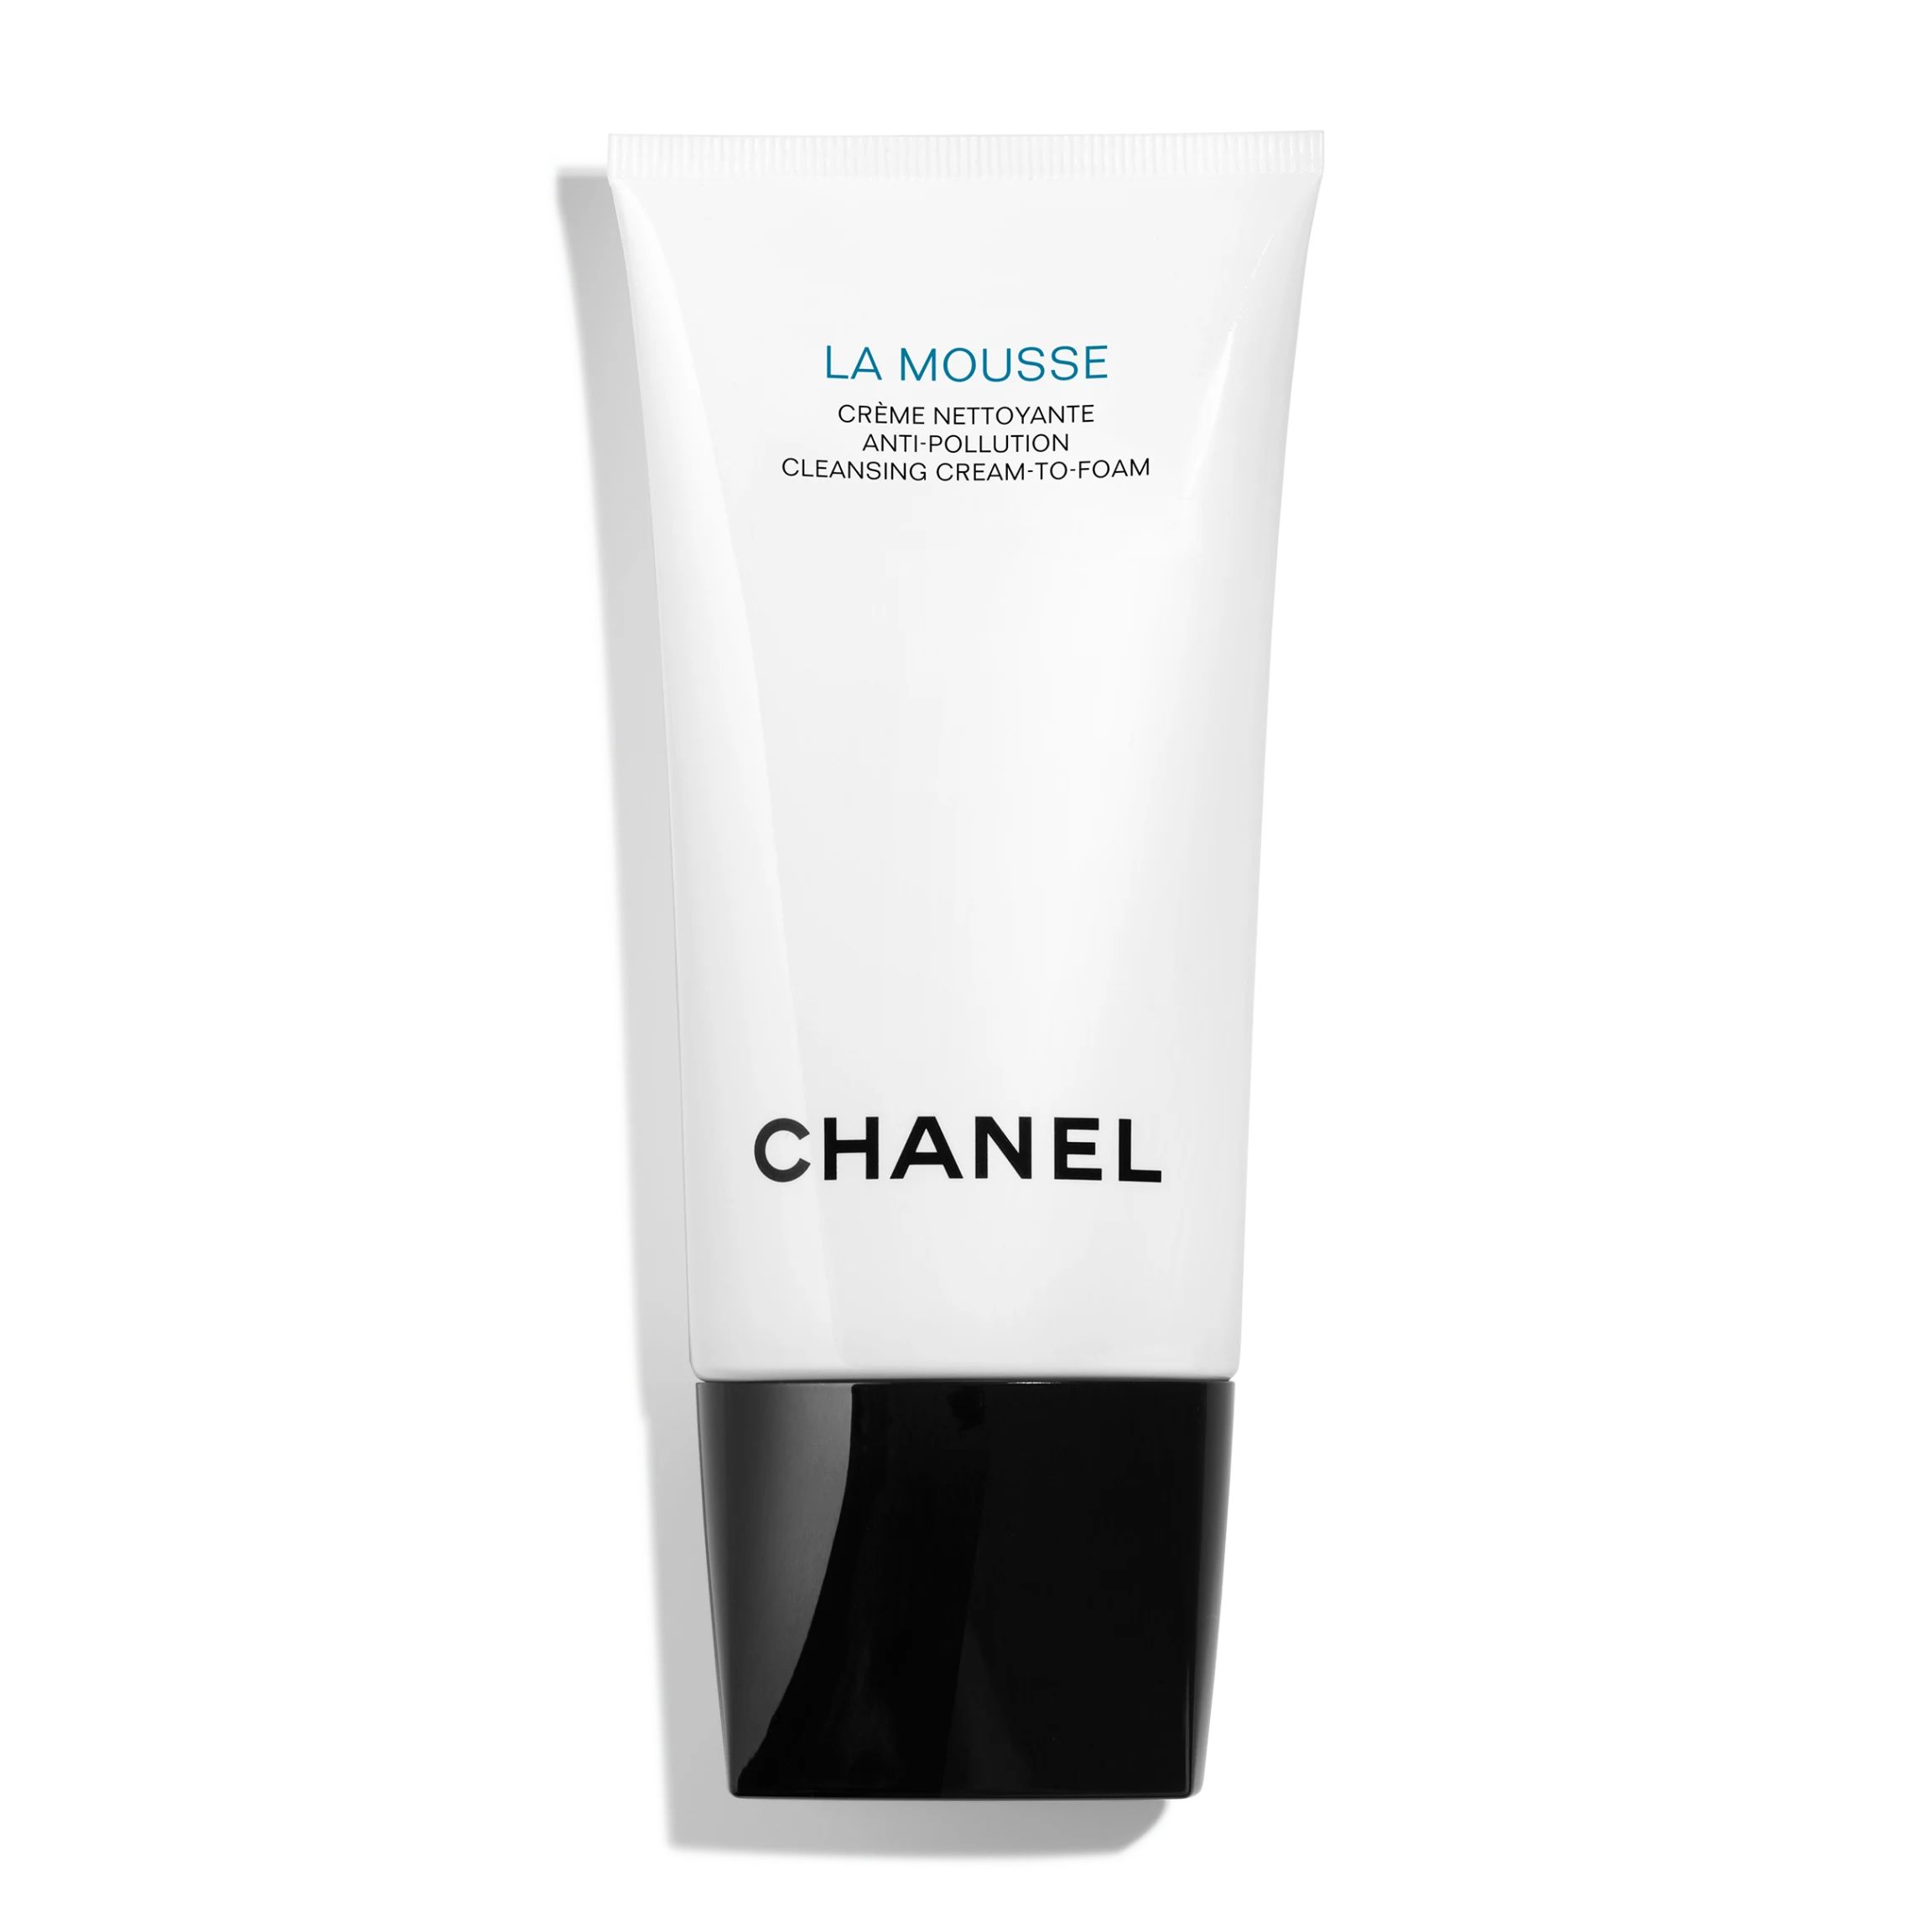 Anti-Pollution Cleansing Cream-to-Foam | Chanel, Inc. (US)